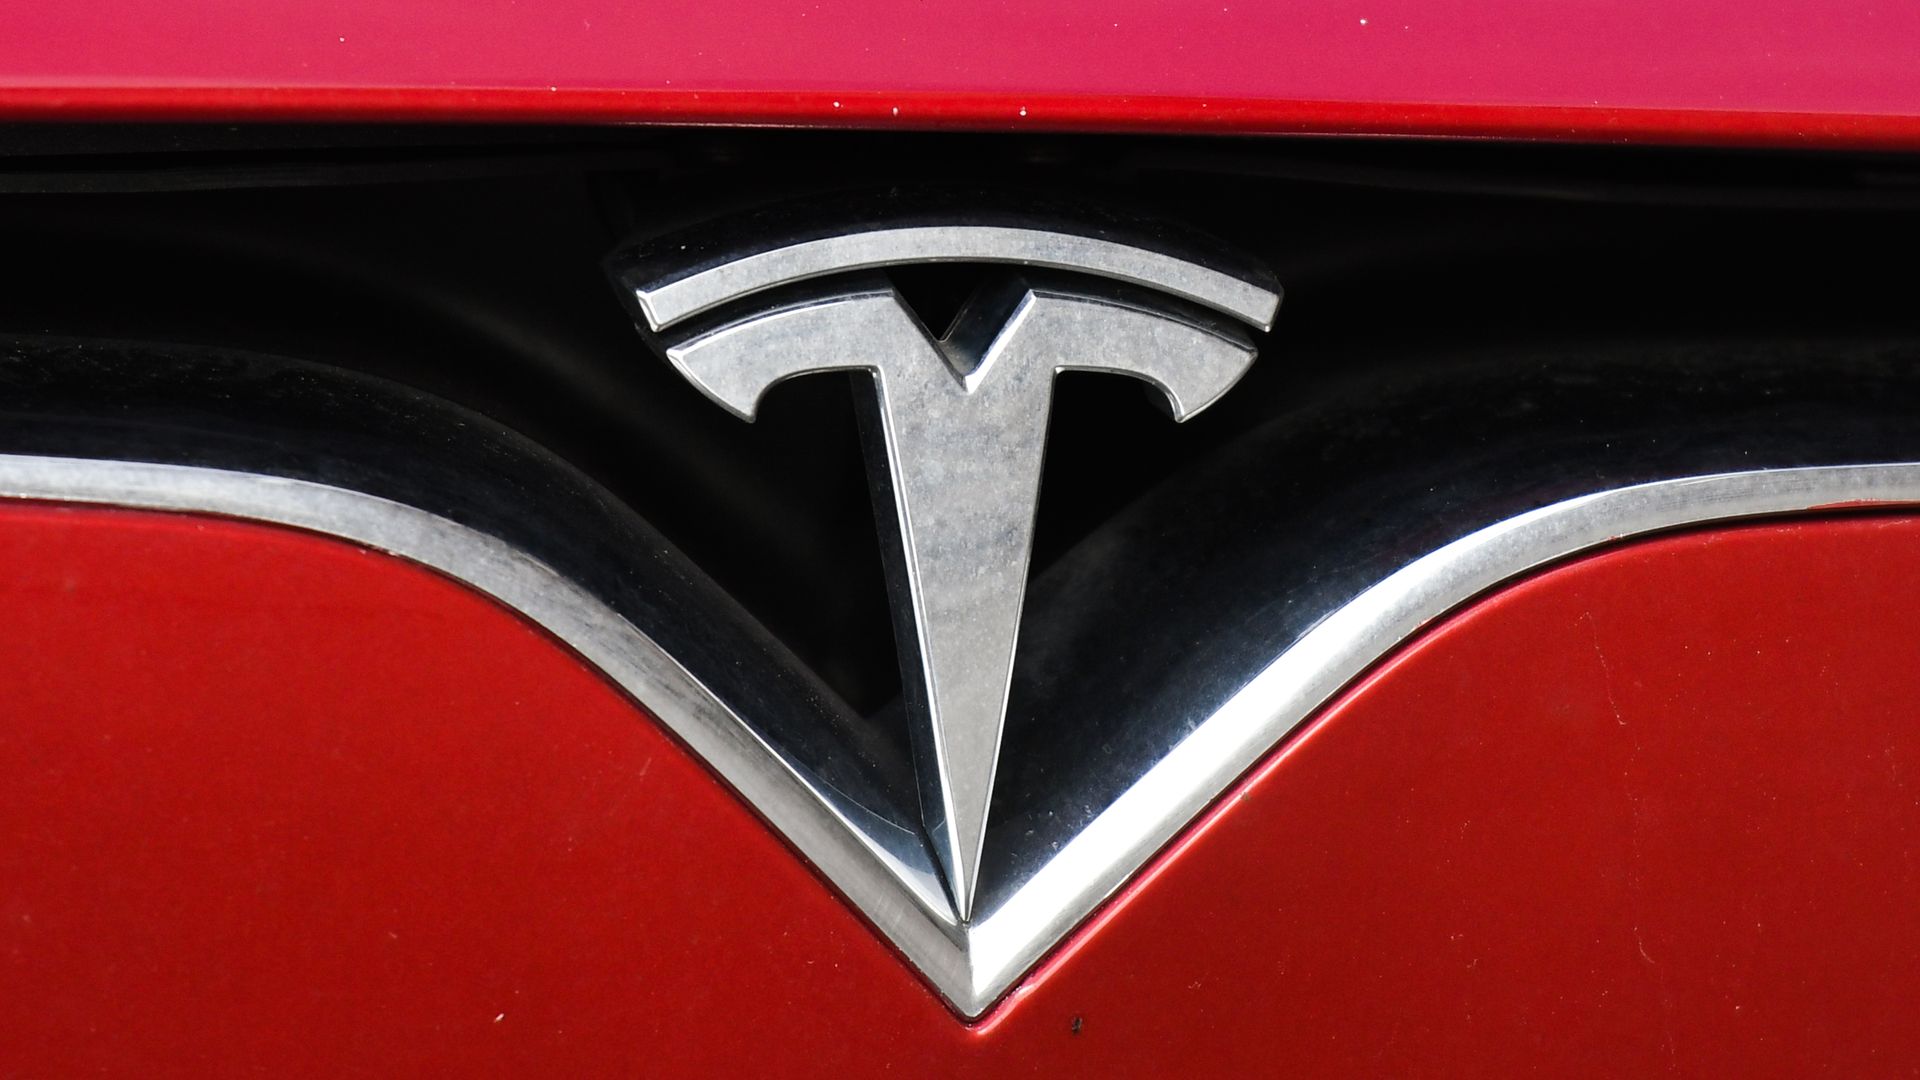 Close-up photo of Tesla logo on a red car. 